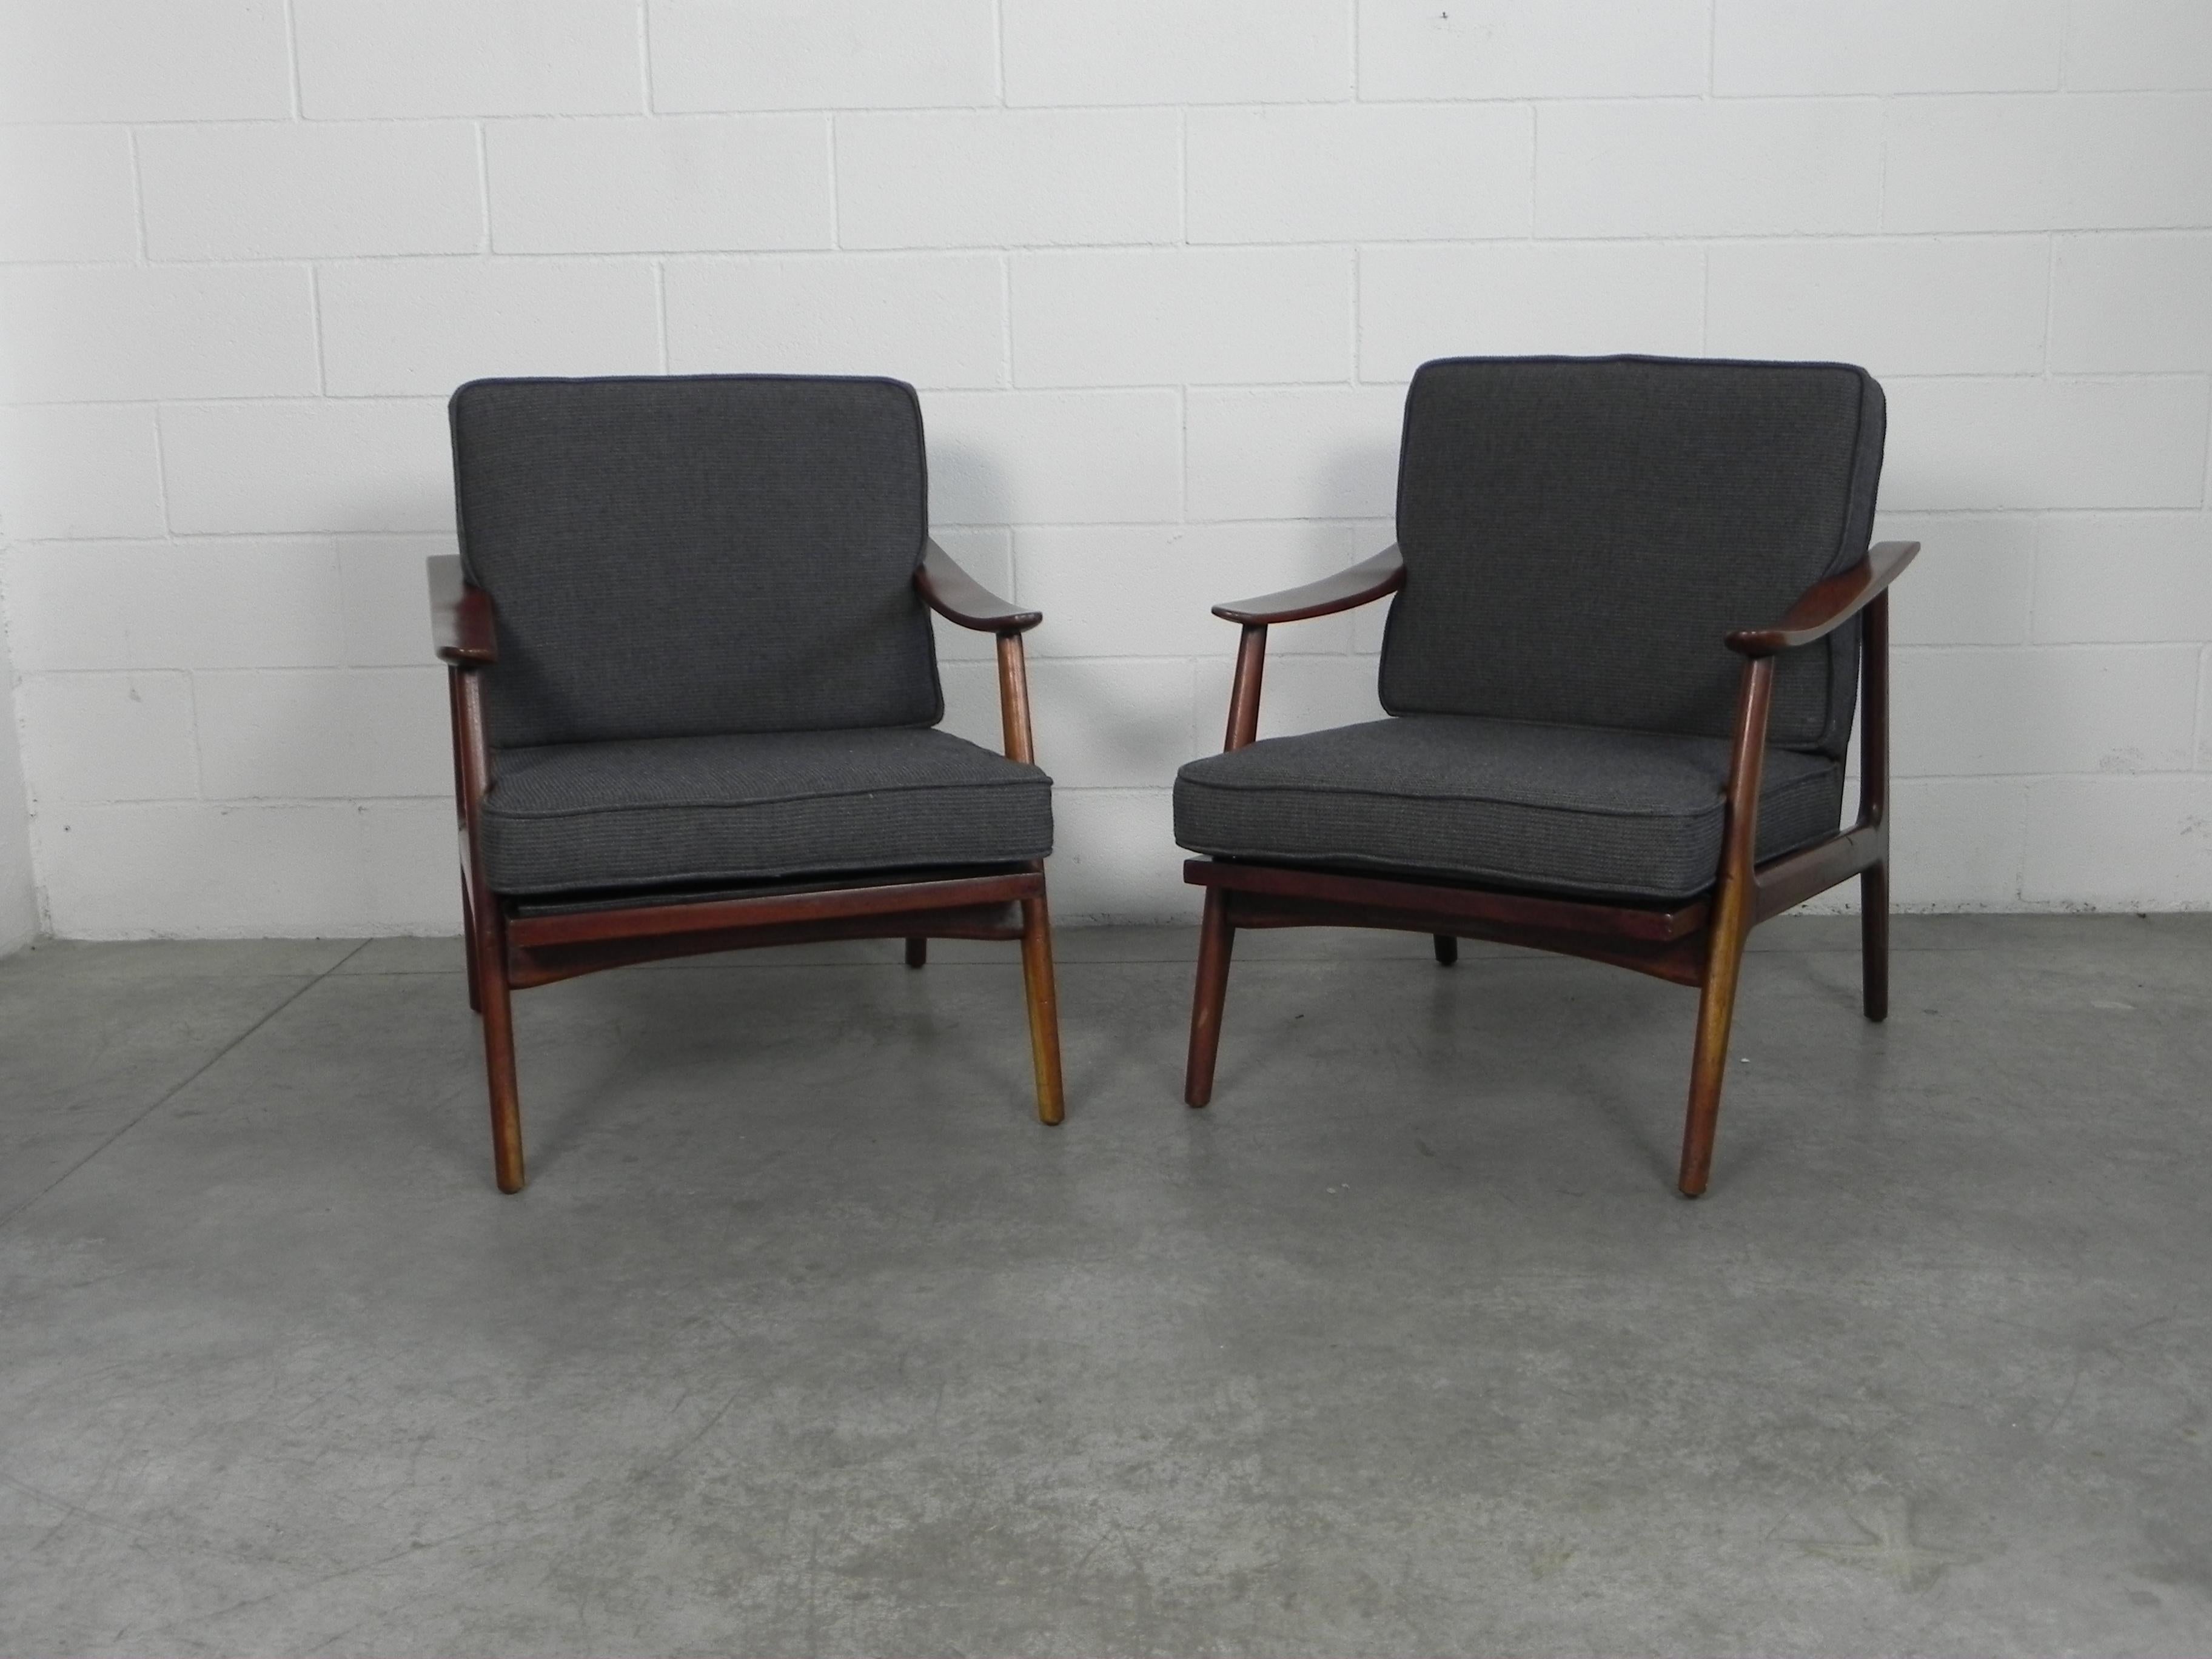 Elegant and stylish set of armchairs designed by Arne Vodder in the 1950s.